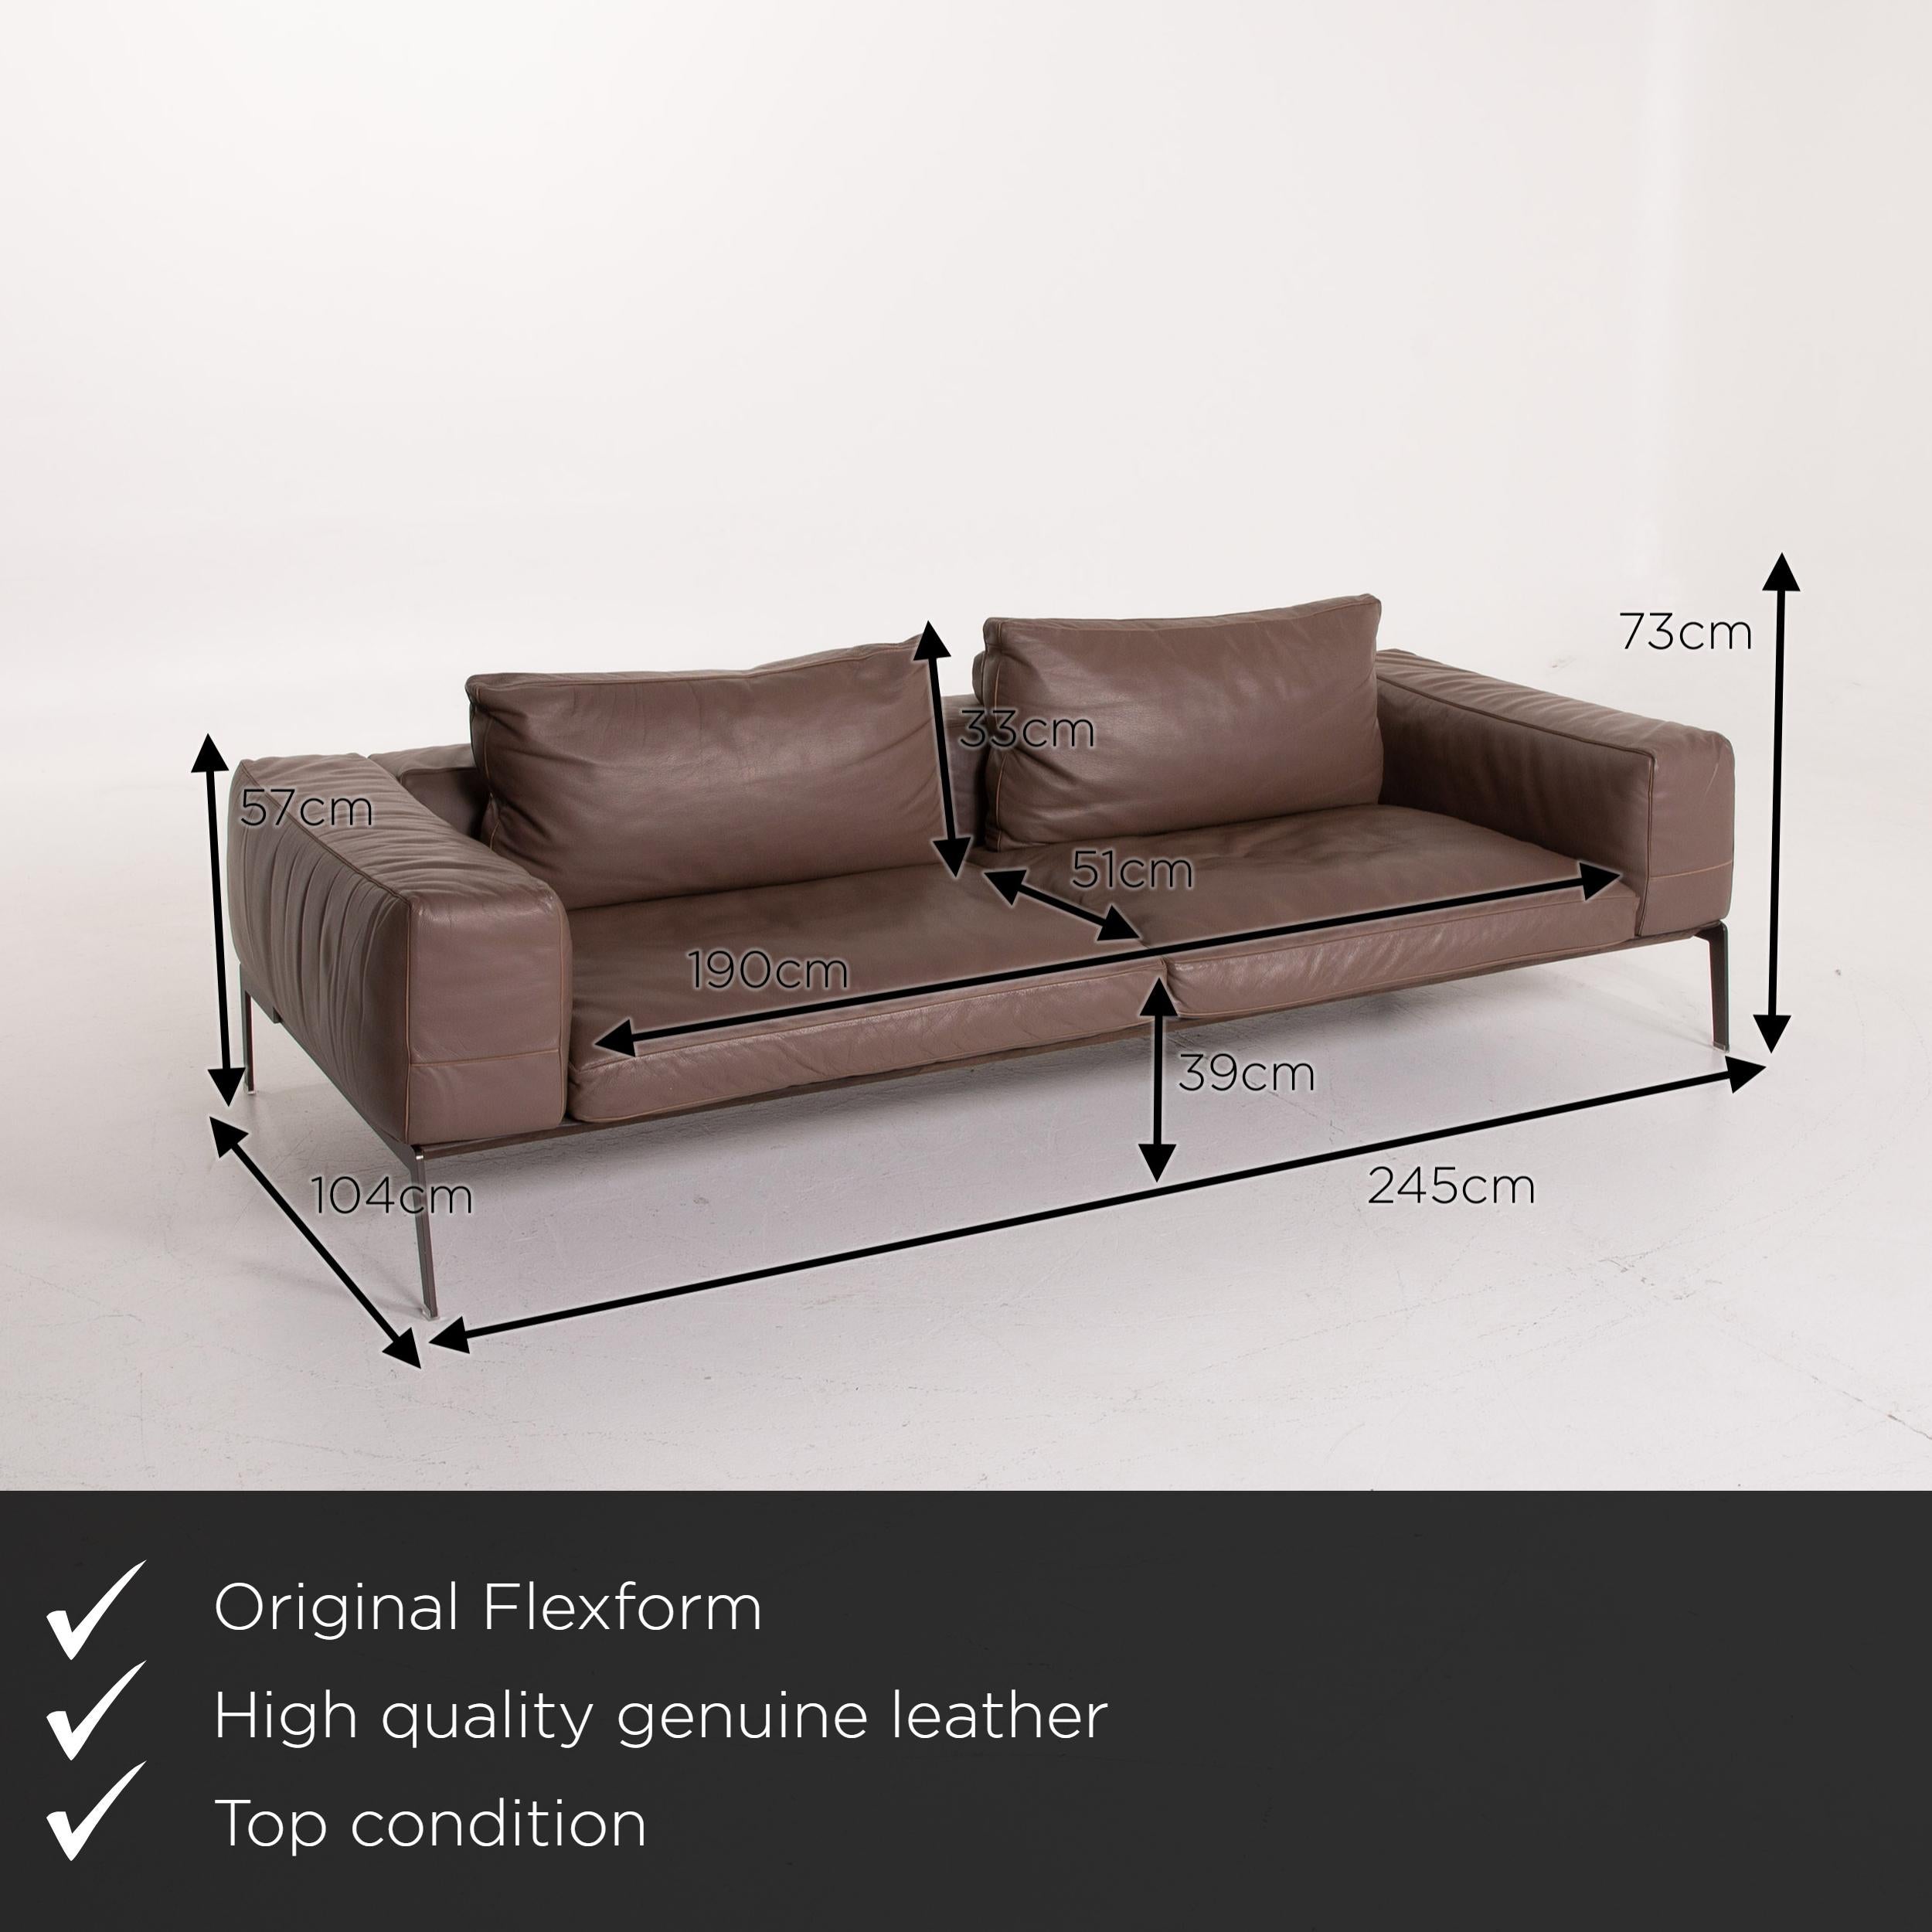 We present to you a Flexform lifesteel 14C24 leather sofa brown three-seat.

Product measurements in centimeters:

Depth 104
Width 245
Height 73
Seat height 39
Rest height 57
Seat depth 51
Seat width 190
Back height 33.
 
 

   